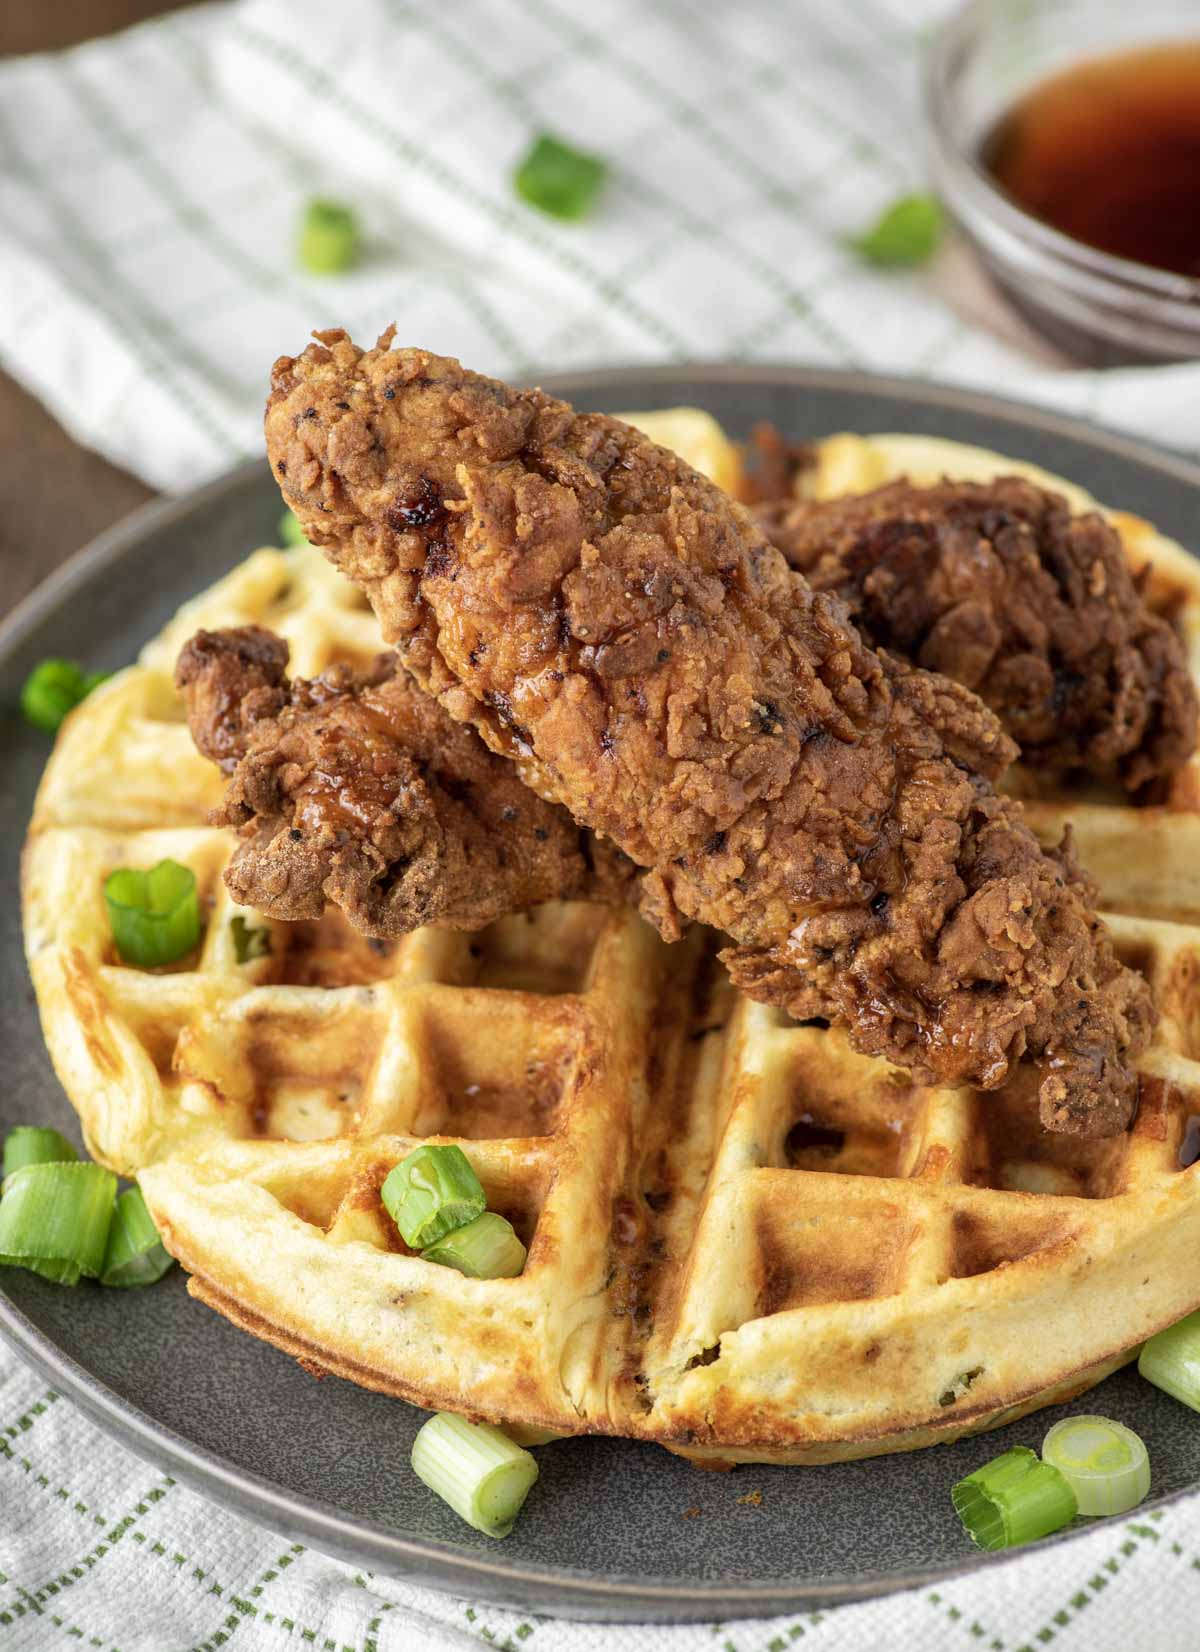 Fried Chicken And Waffles Recipe